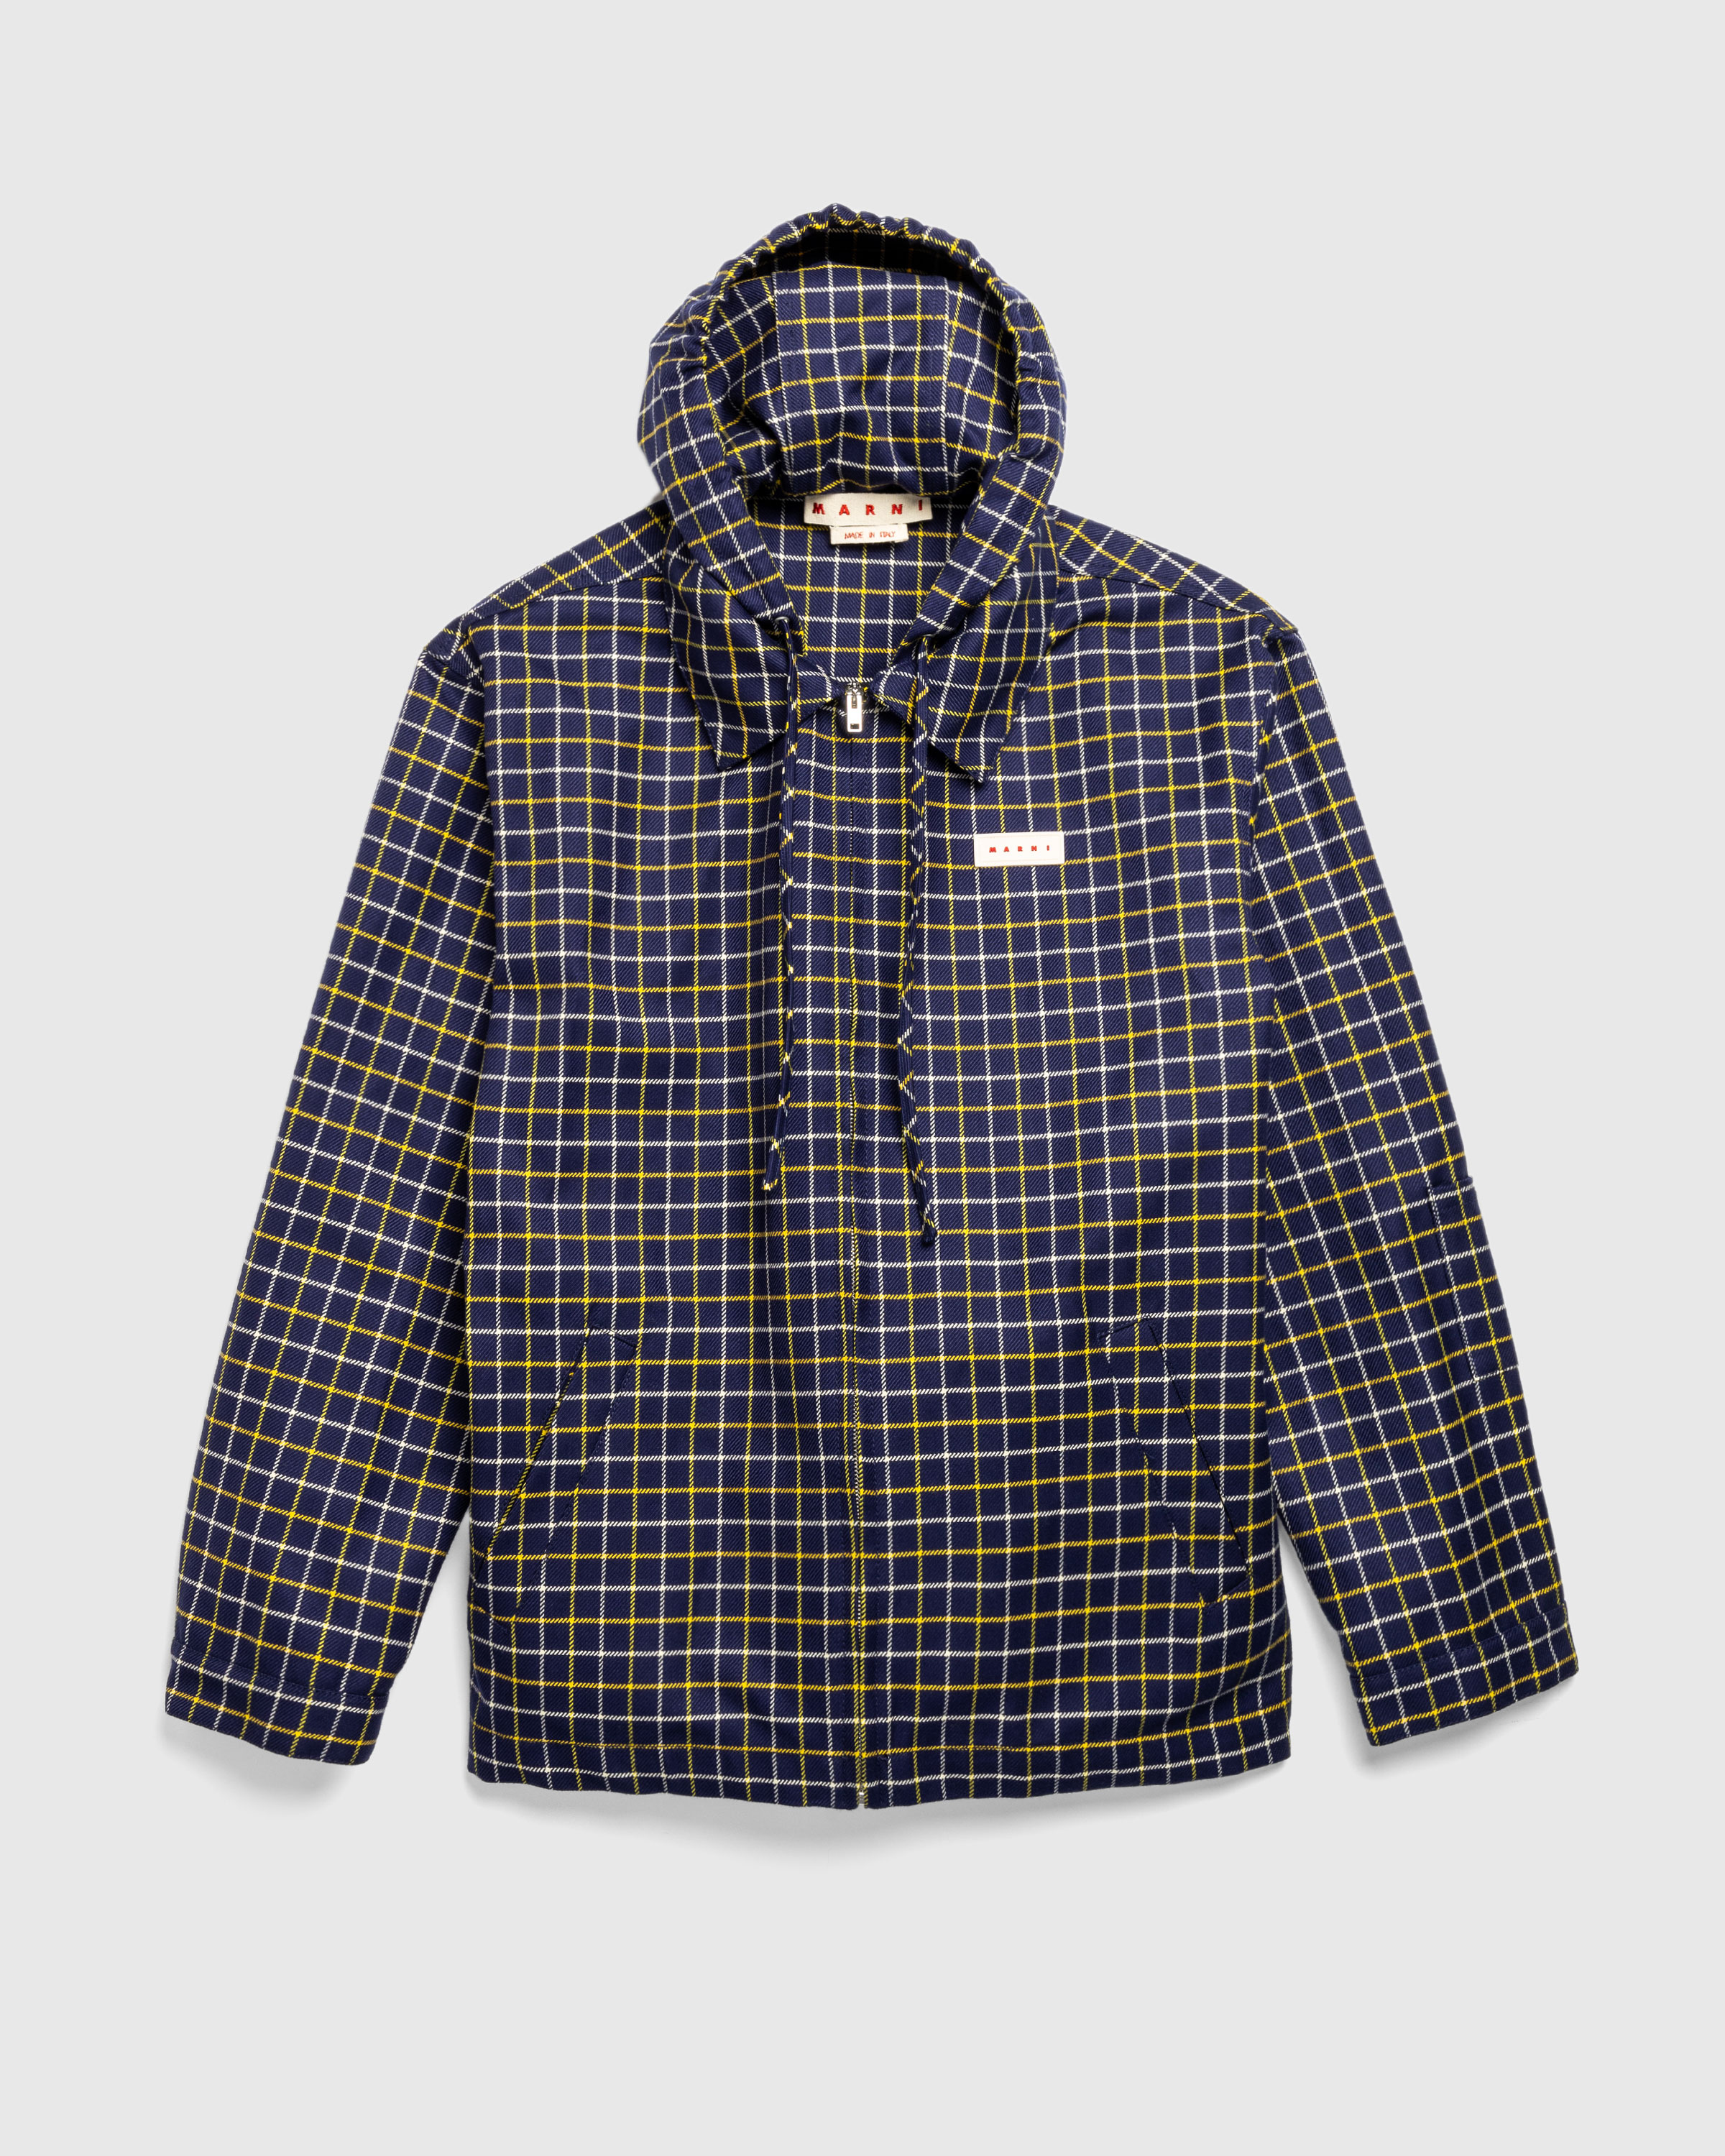 Marni – Checked Wool and Cotton Overshirt Blumarine - Outerwear - Blue - Image 1